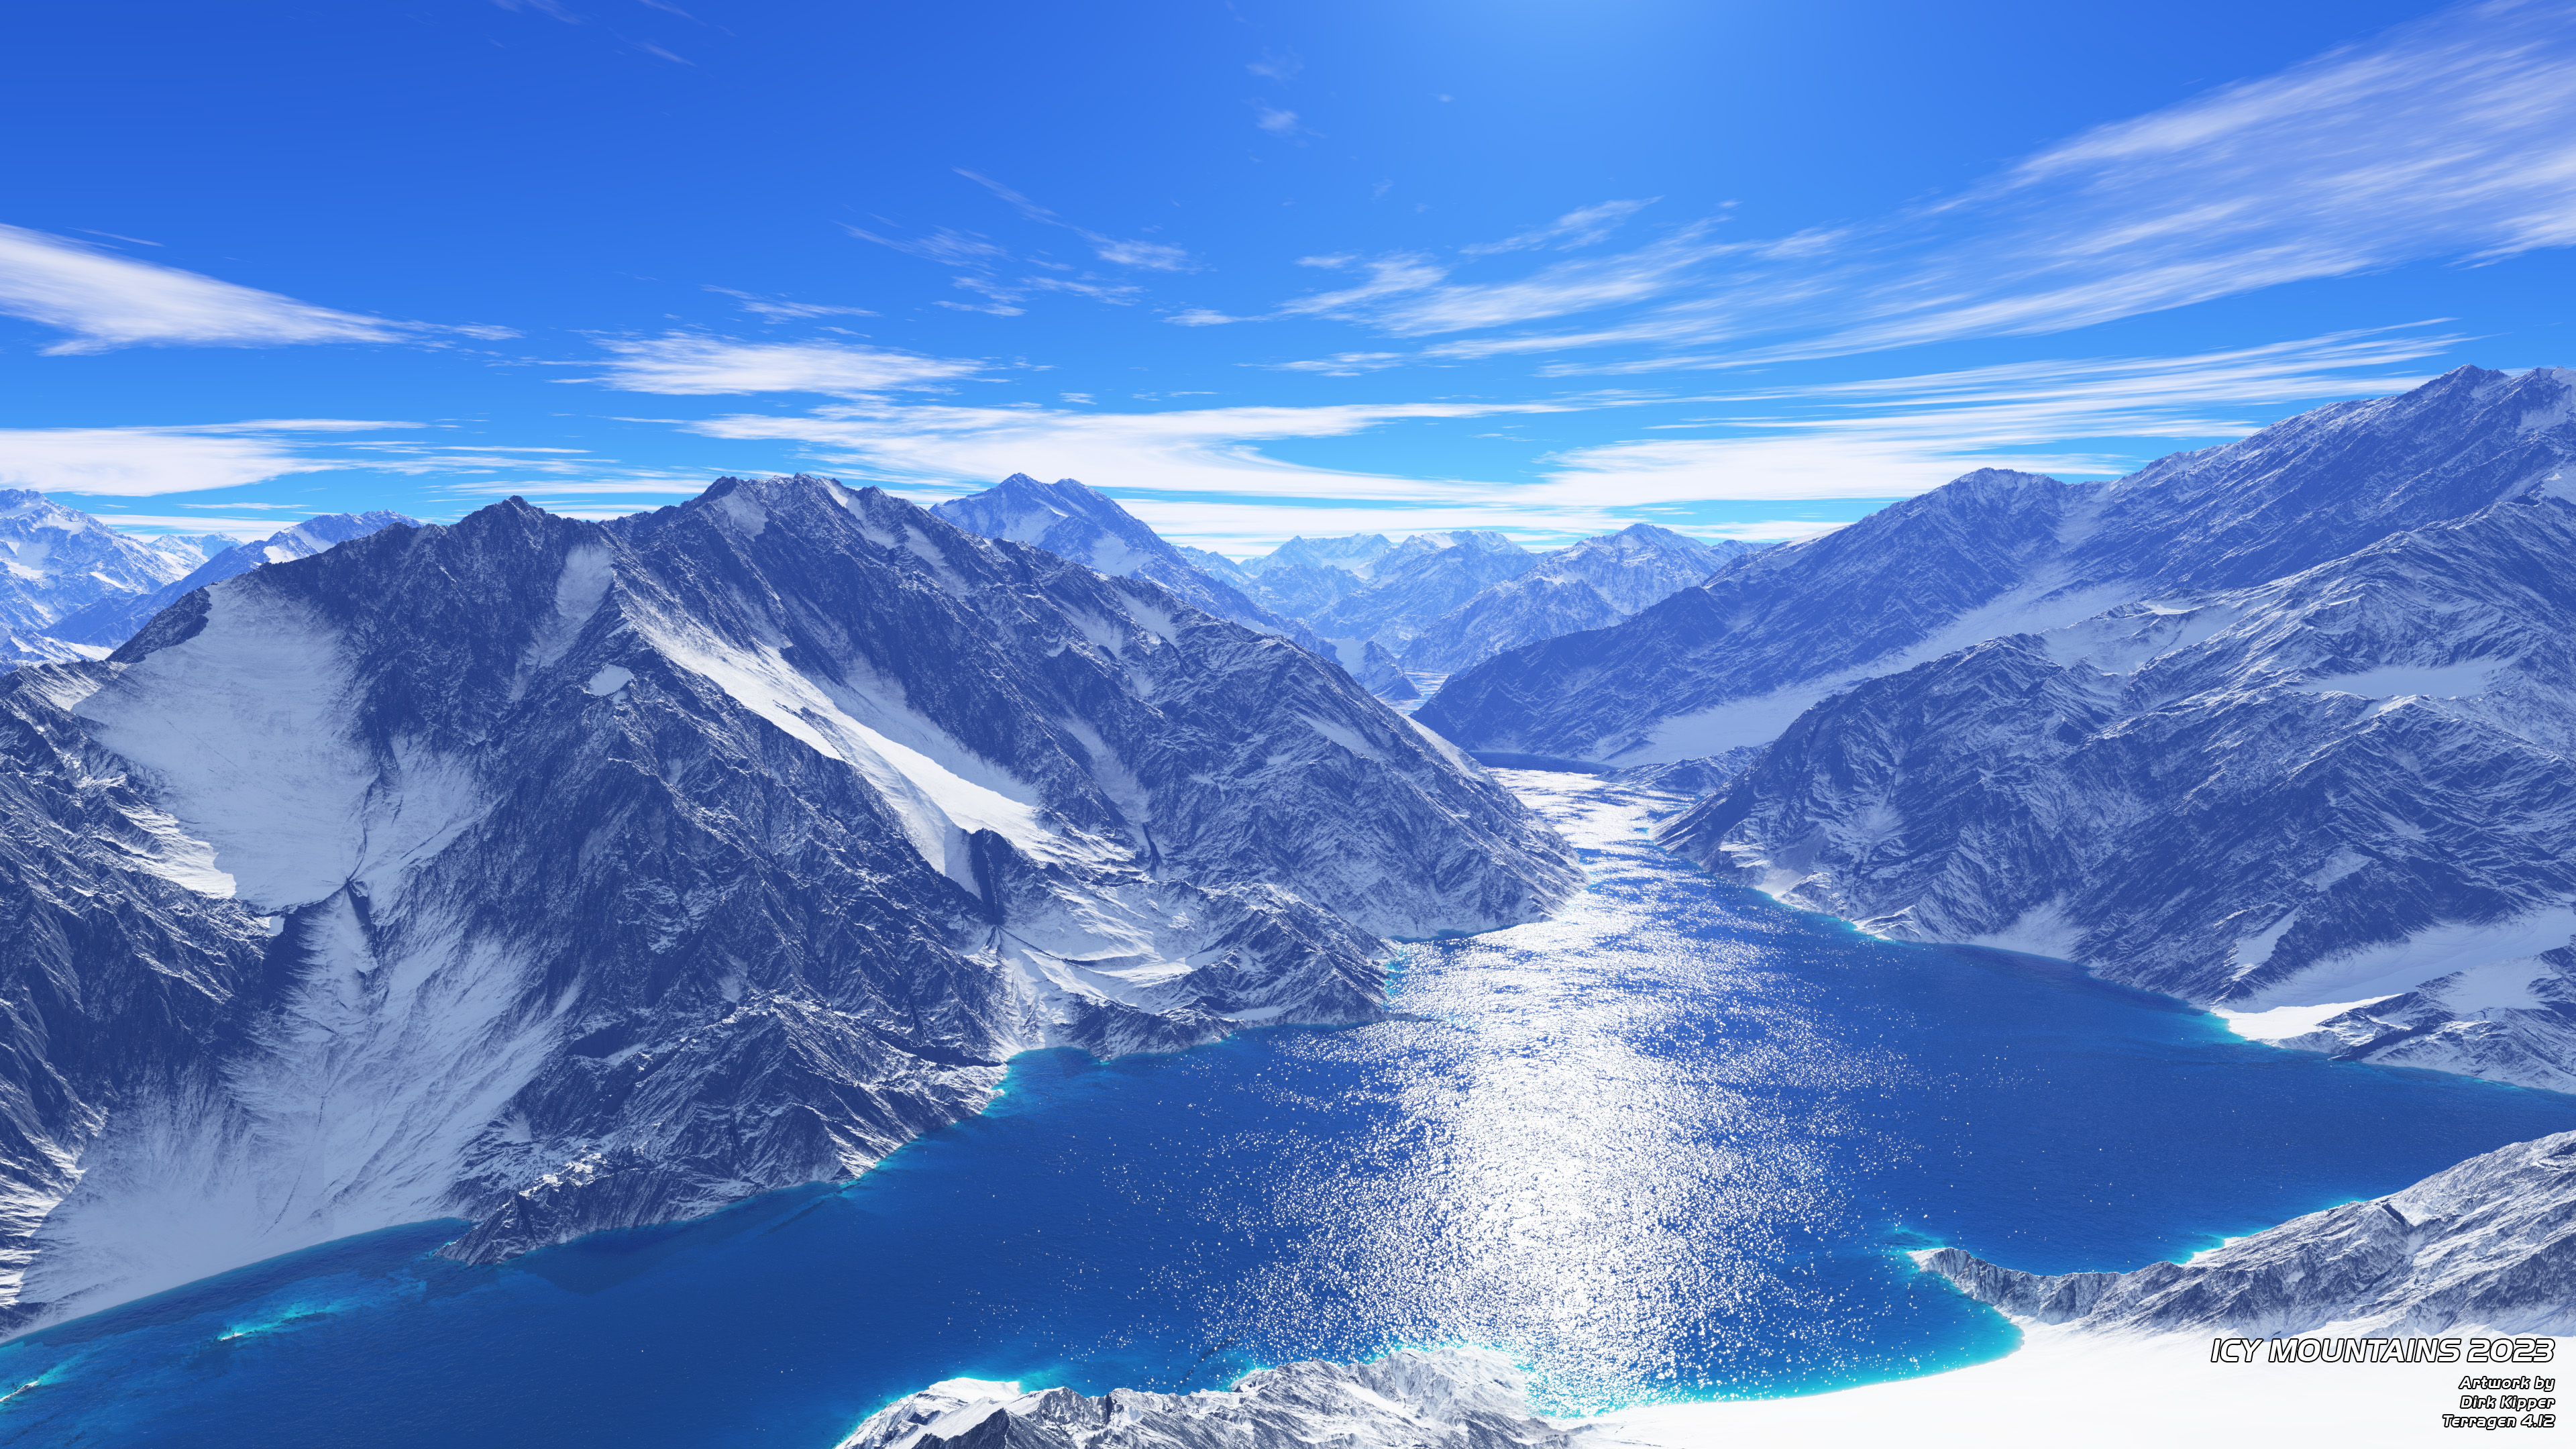 Icy Mountains 2023 by Stormlord.jpg